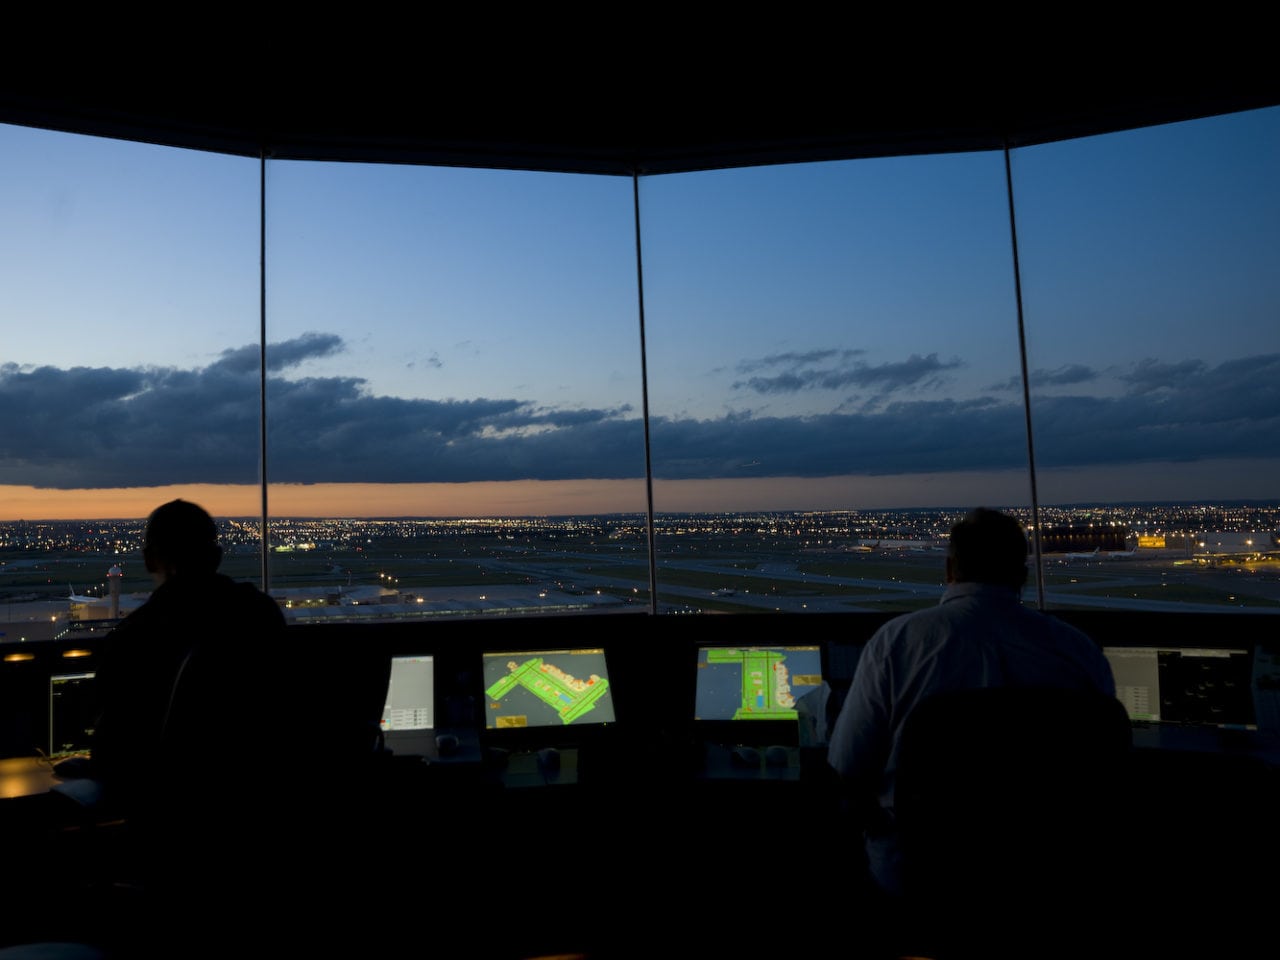 Concept of operations of a control tower using space-based ADS-B. Photo: Aireon